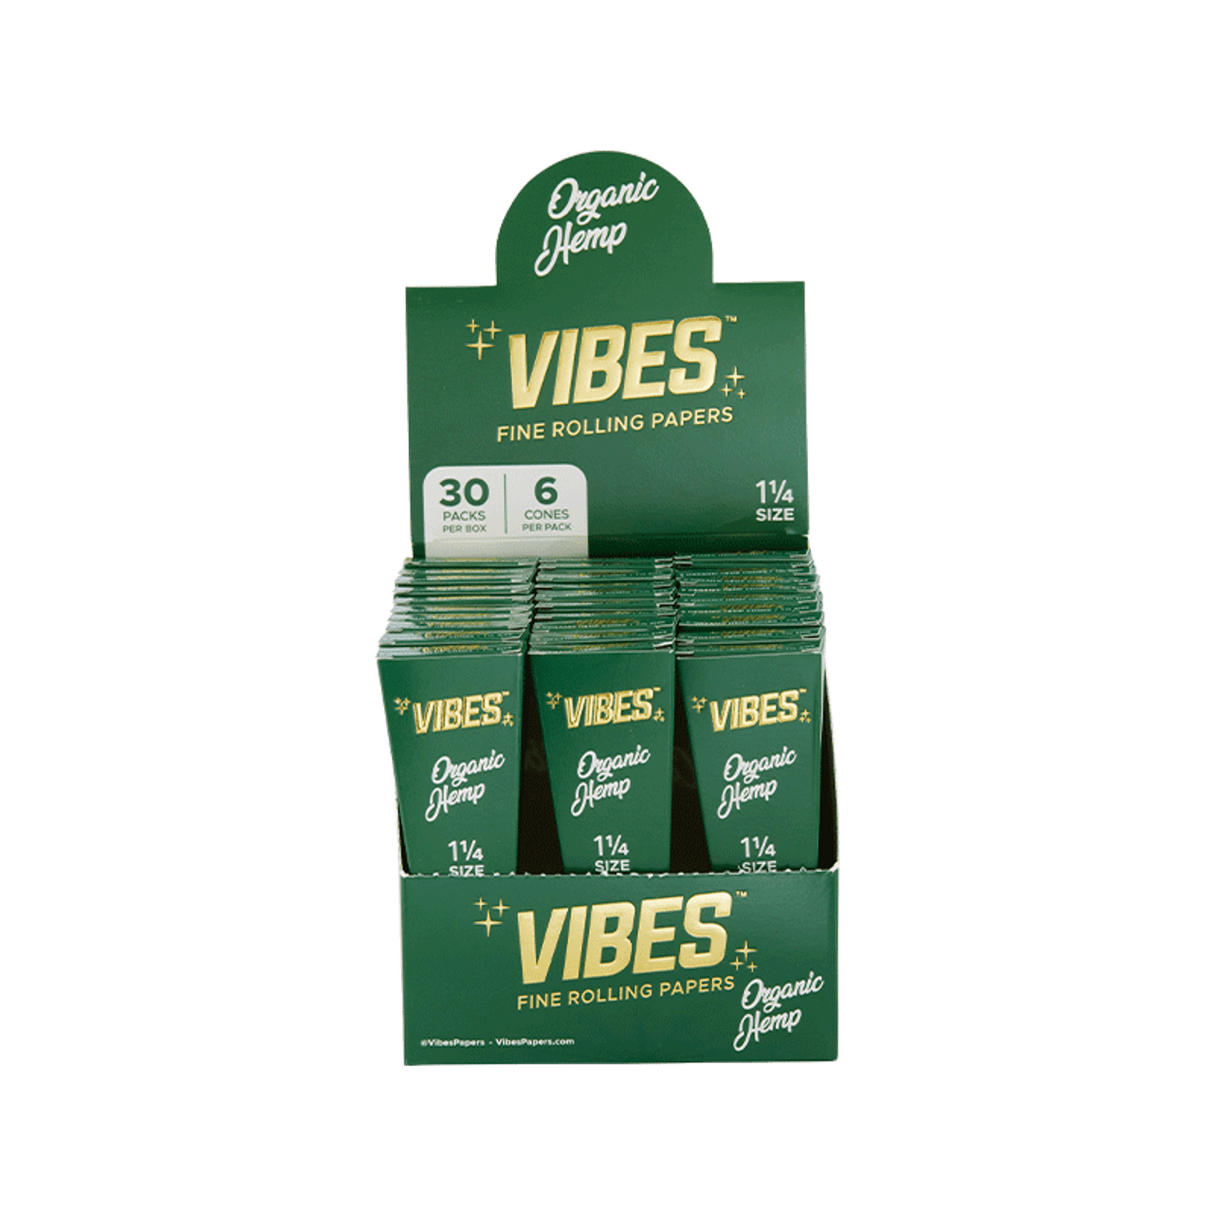 Vibes Organic Hemp Cones Box - 1.25" Size Front View with 30 Packs Display